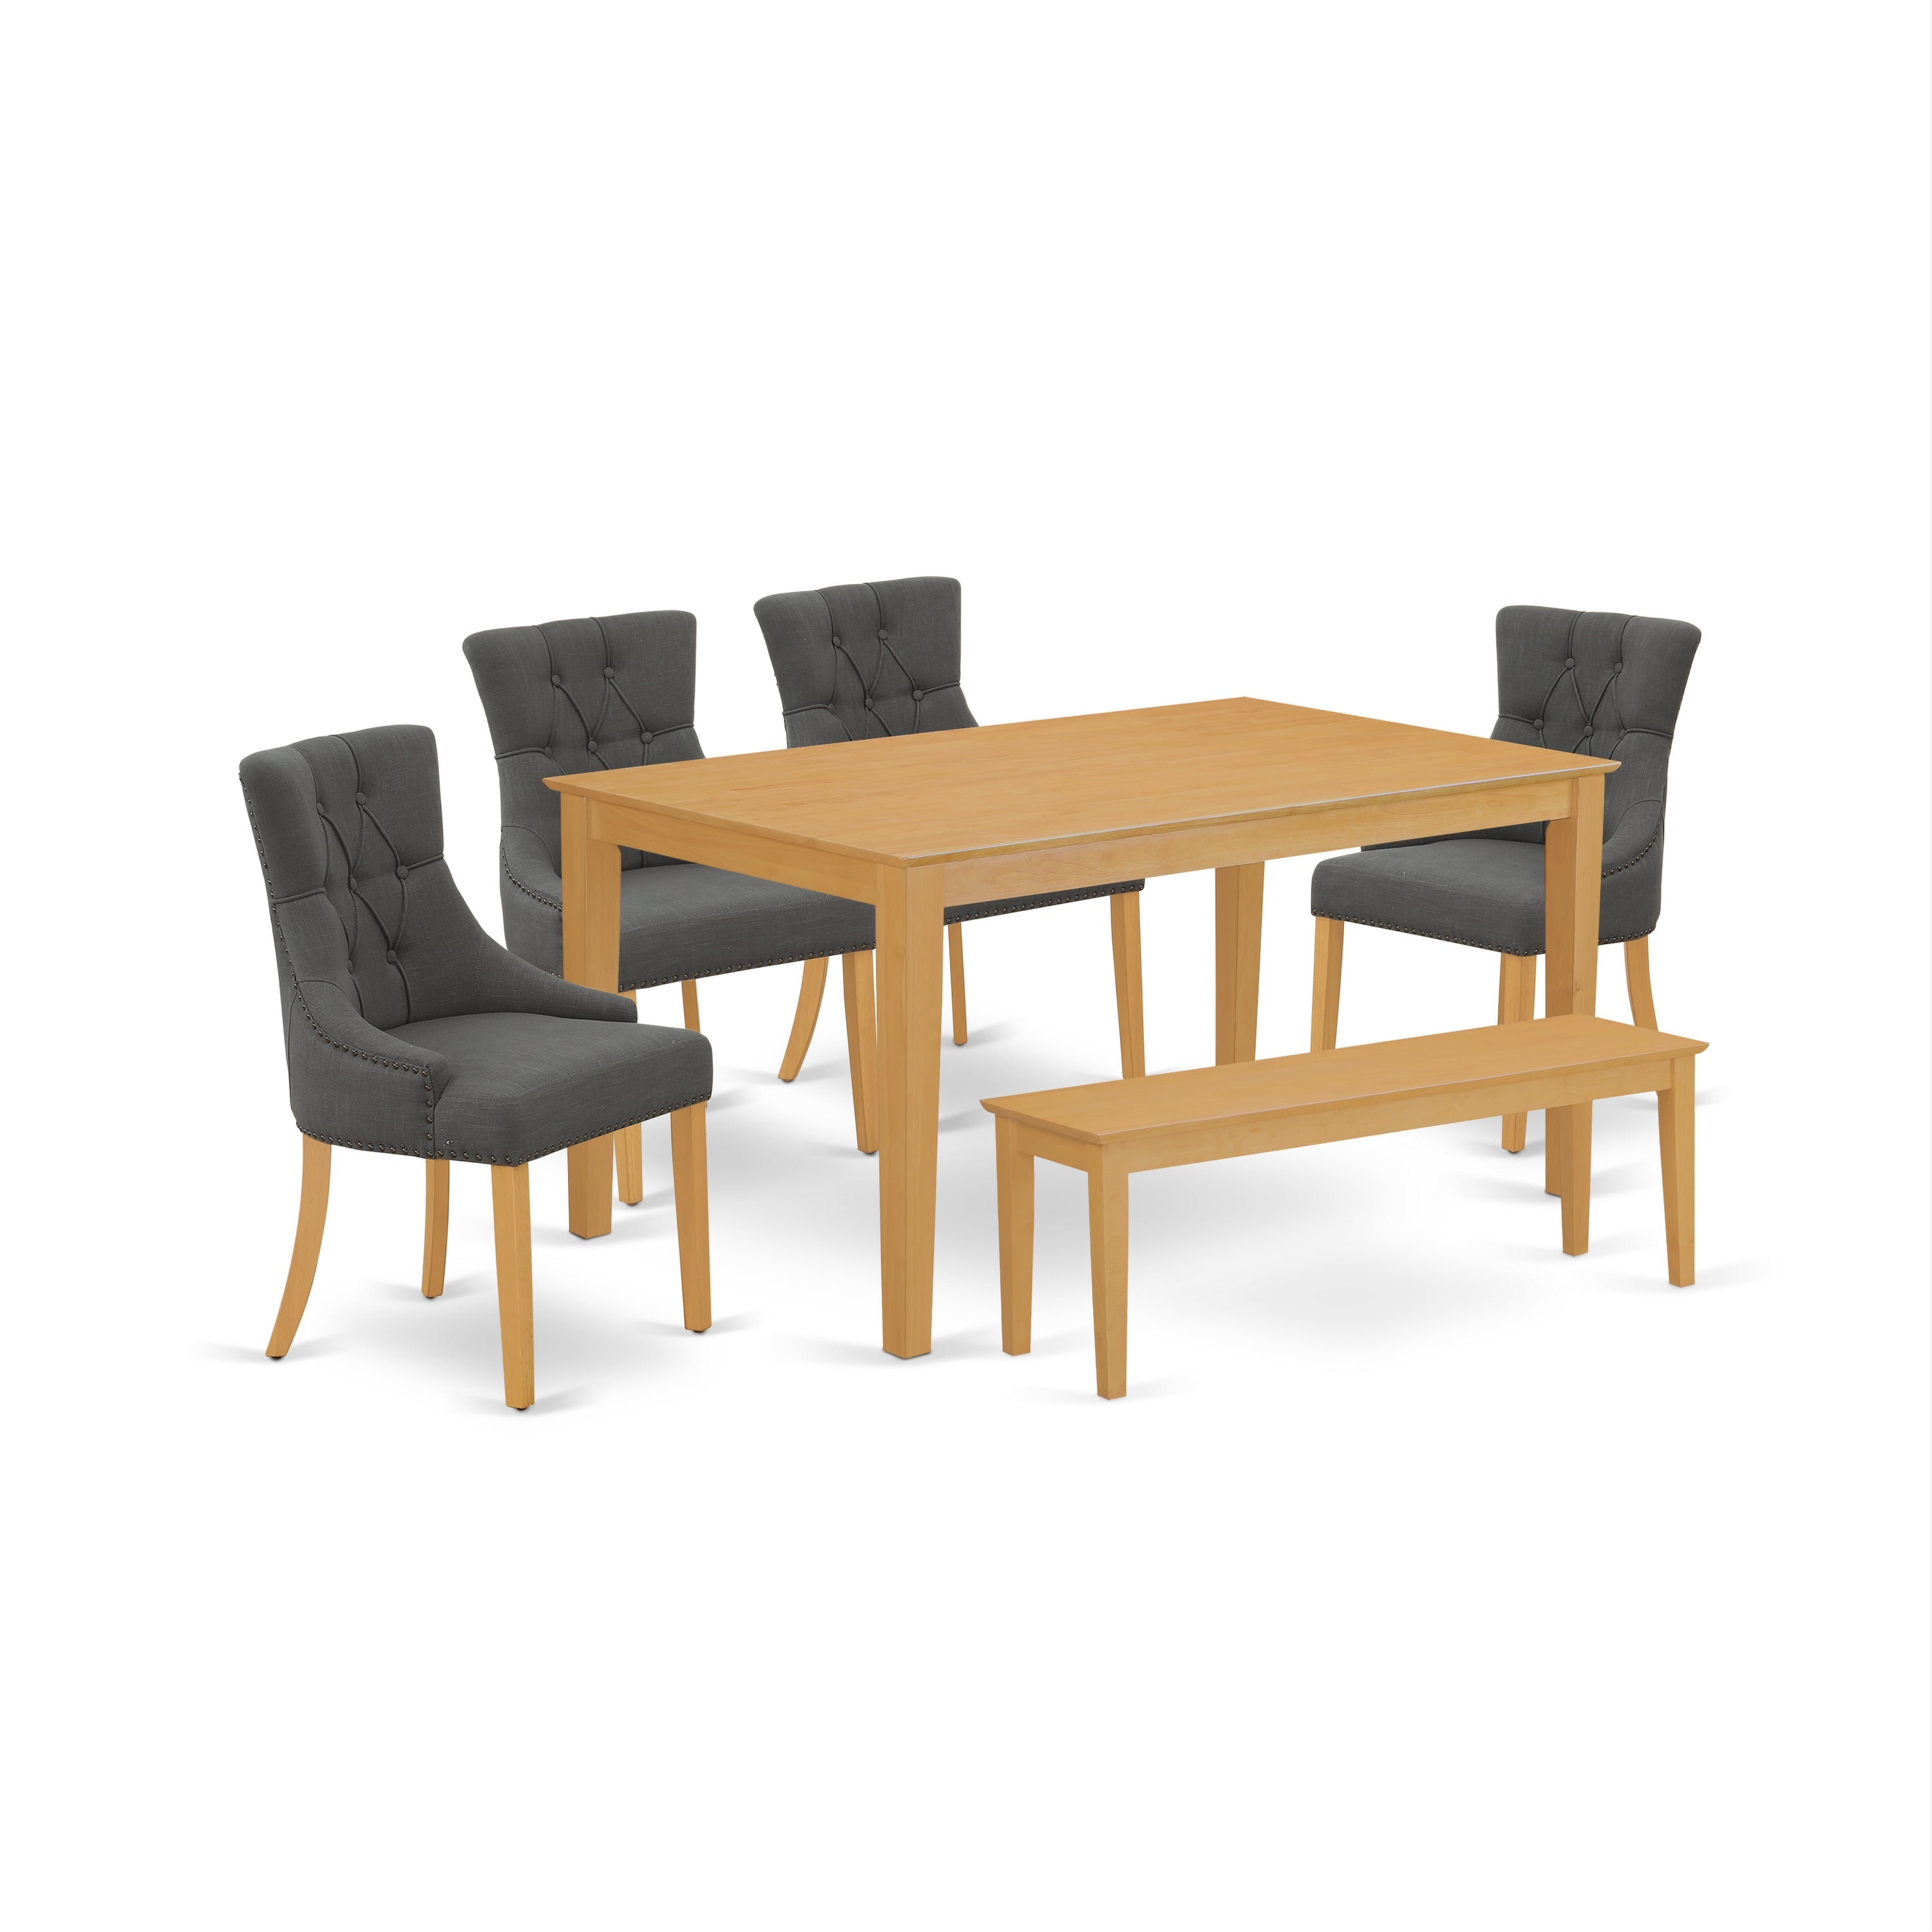 CAFR6-OAK-20 6Pc Dining Set Includes a Rectangle Dinette Table and Four Parson Chairs with Dark Gotham Grey Fabric and a Bench, Oak Finish